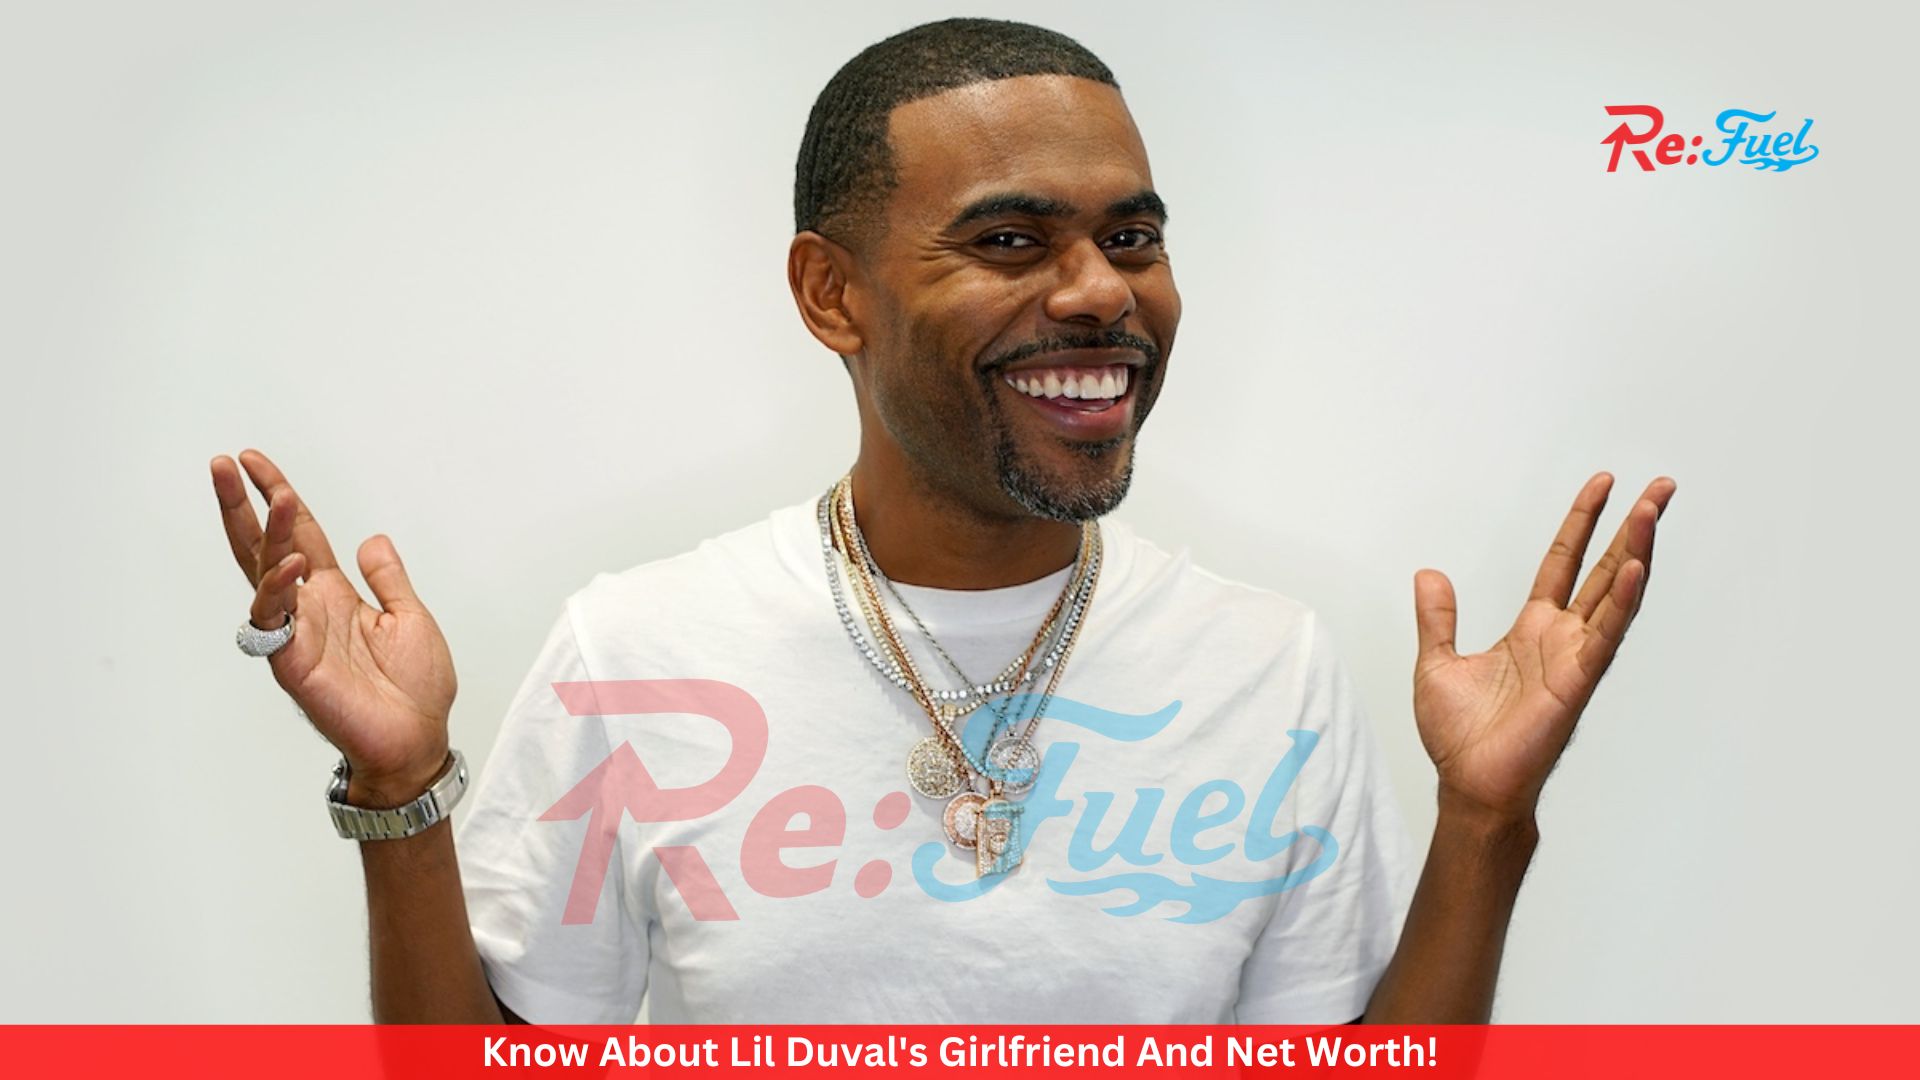 Know About Lil Duval's Girlfriend And Net Worth!